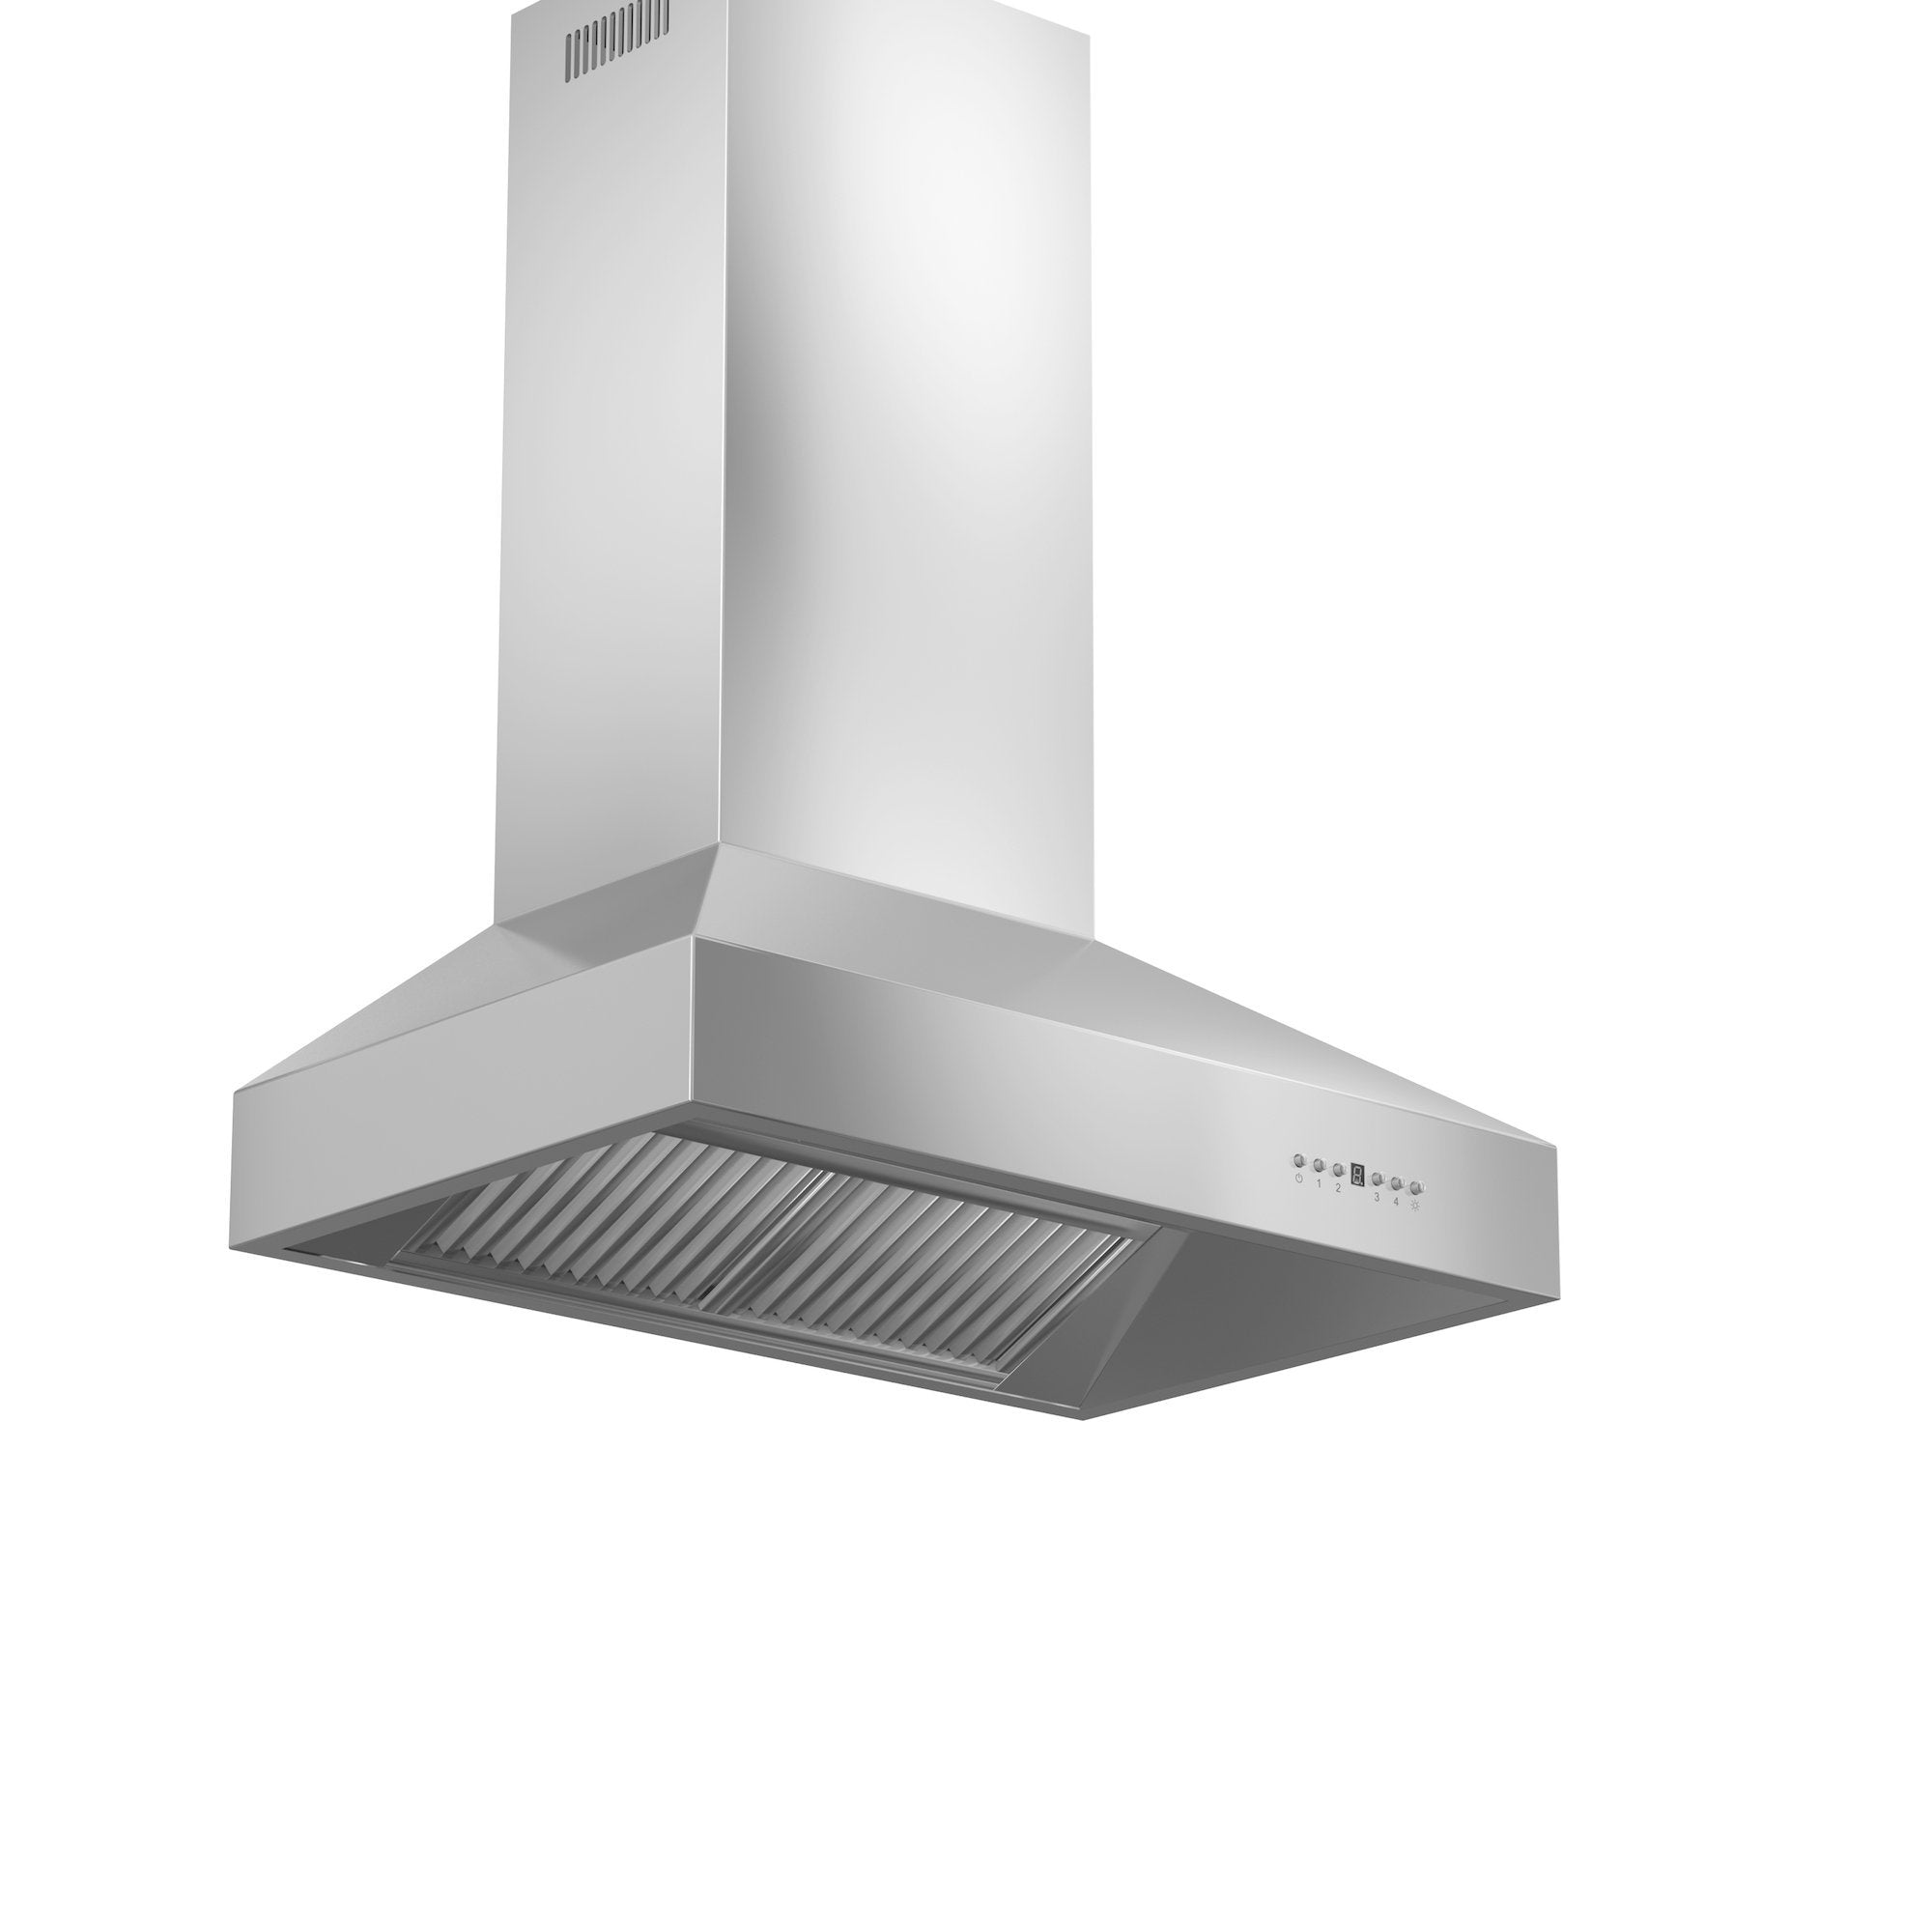 ZLINE Professional Convertible Vent Wall Mount Range Hood in Stainless Steel - 697